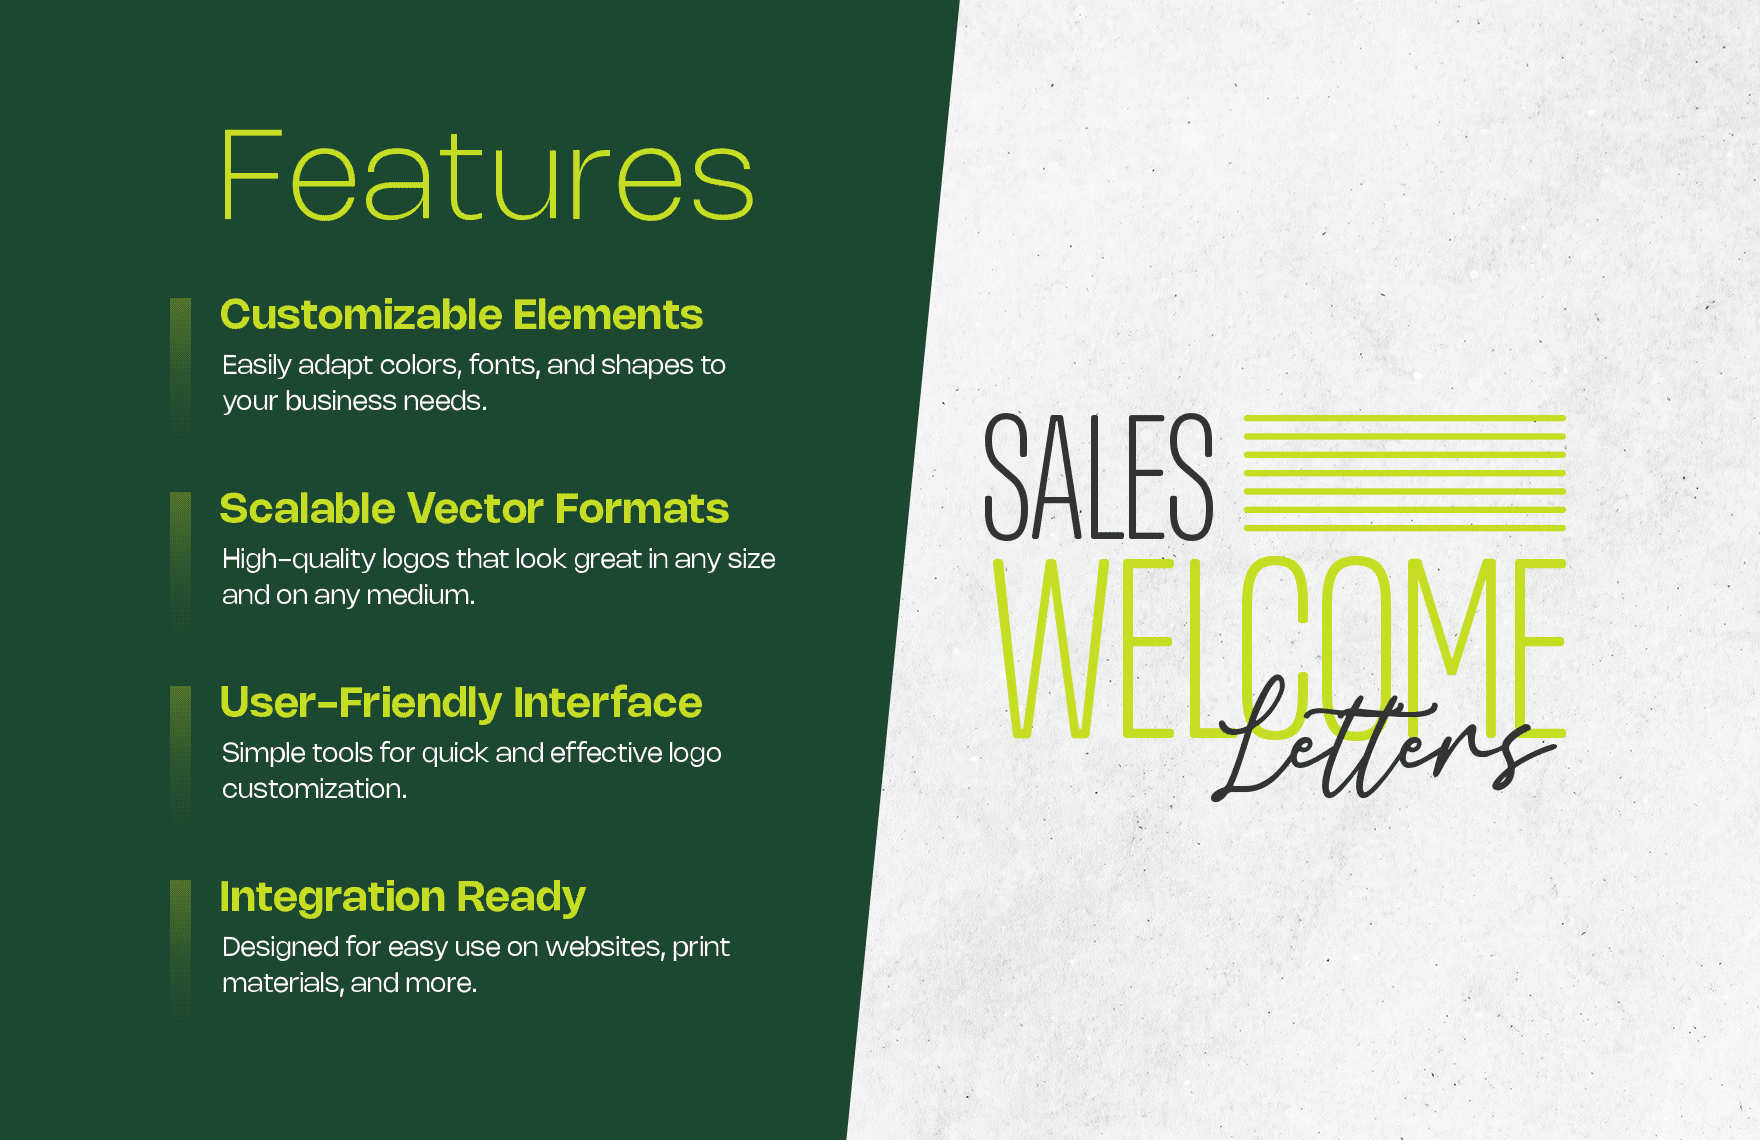 Sales Welcome Letters Logo Template